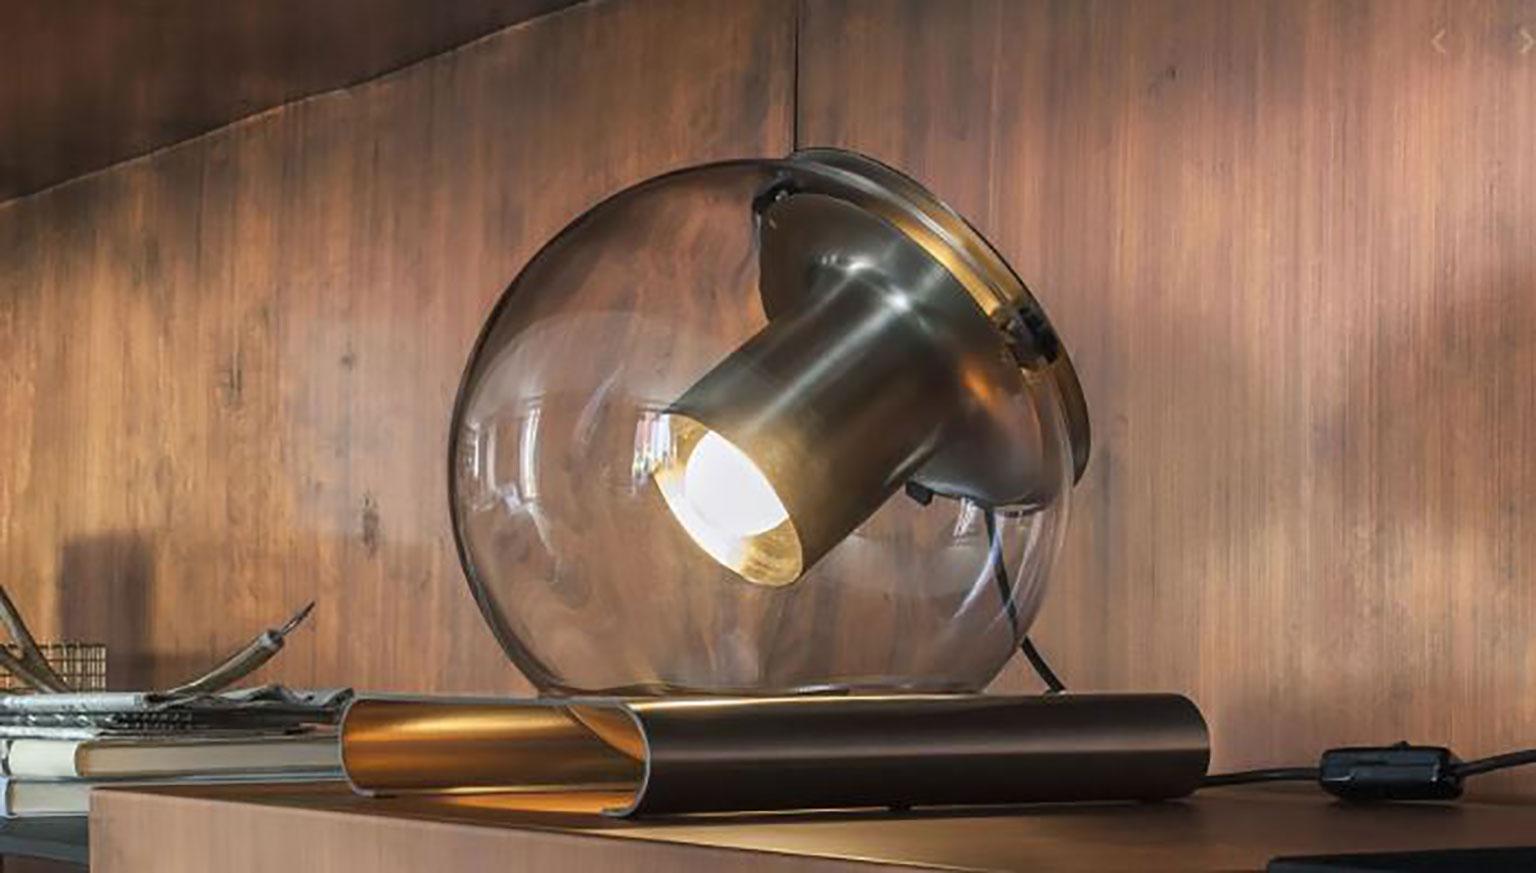 Globe Wall Lamp by Joe Colombo for Oluce In New Condition For Sale In Brooklyn, NY